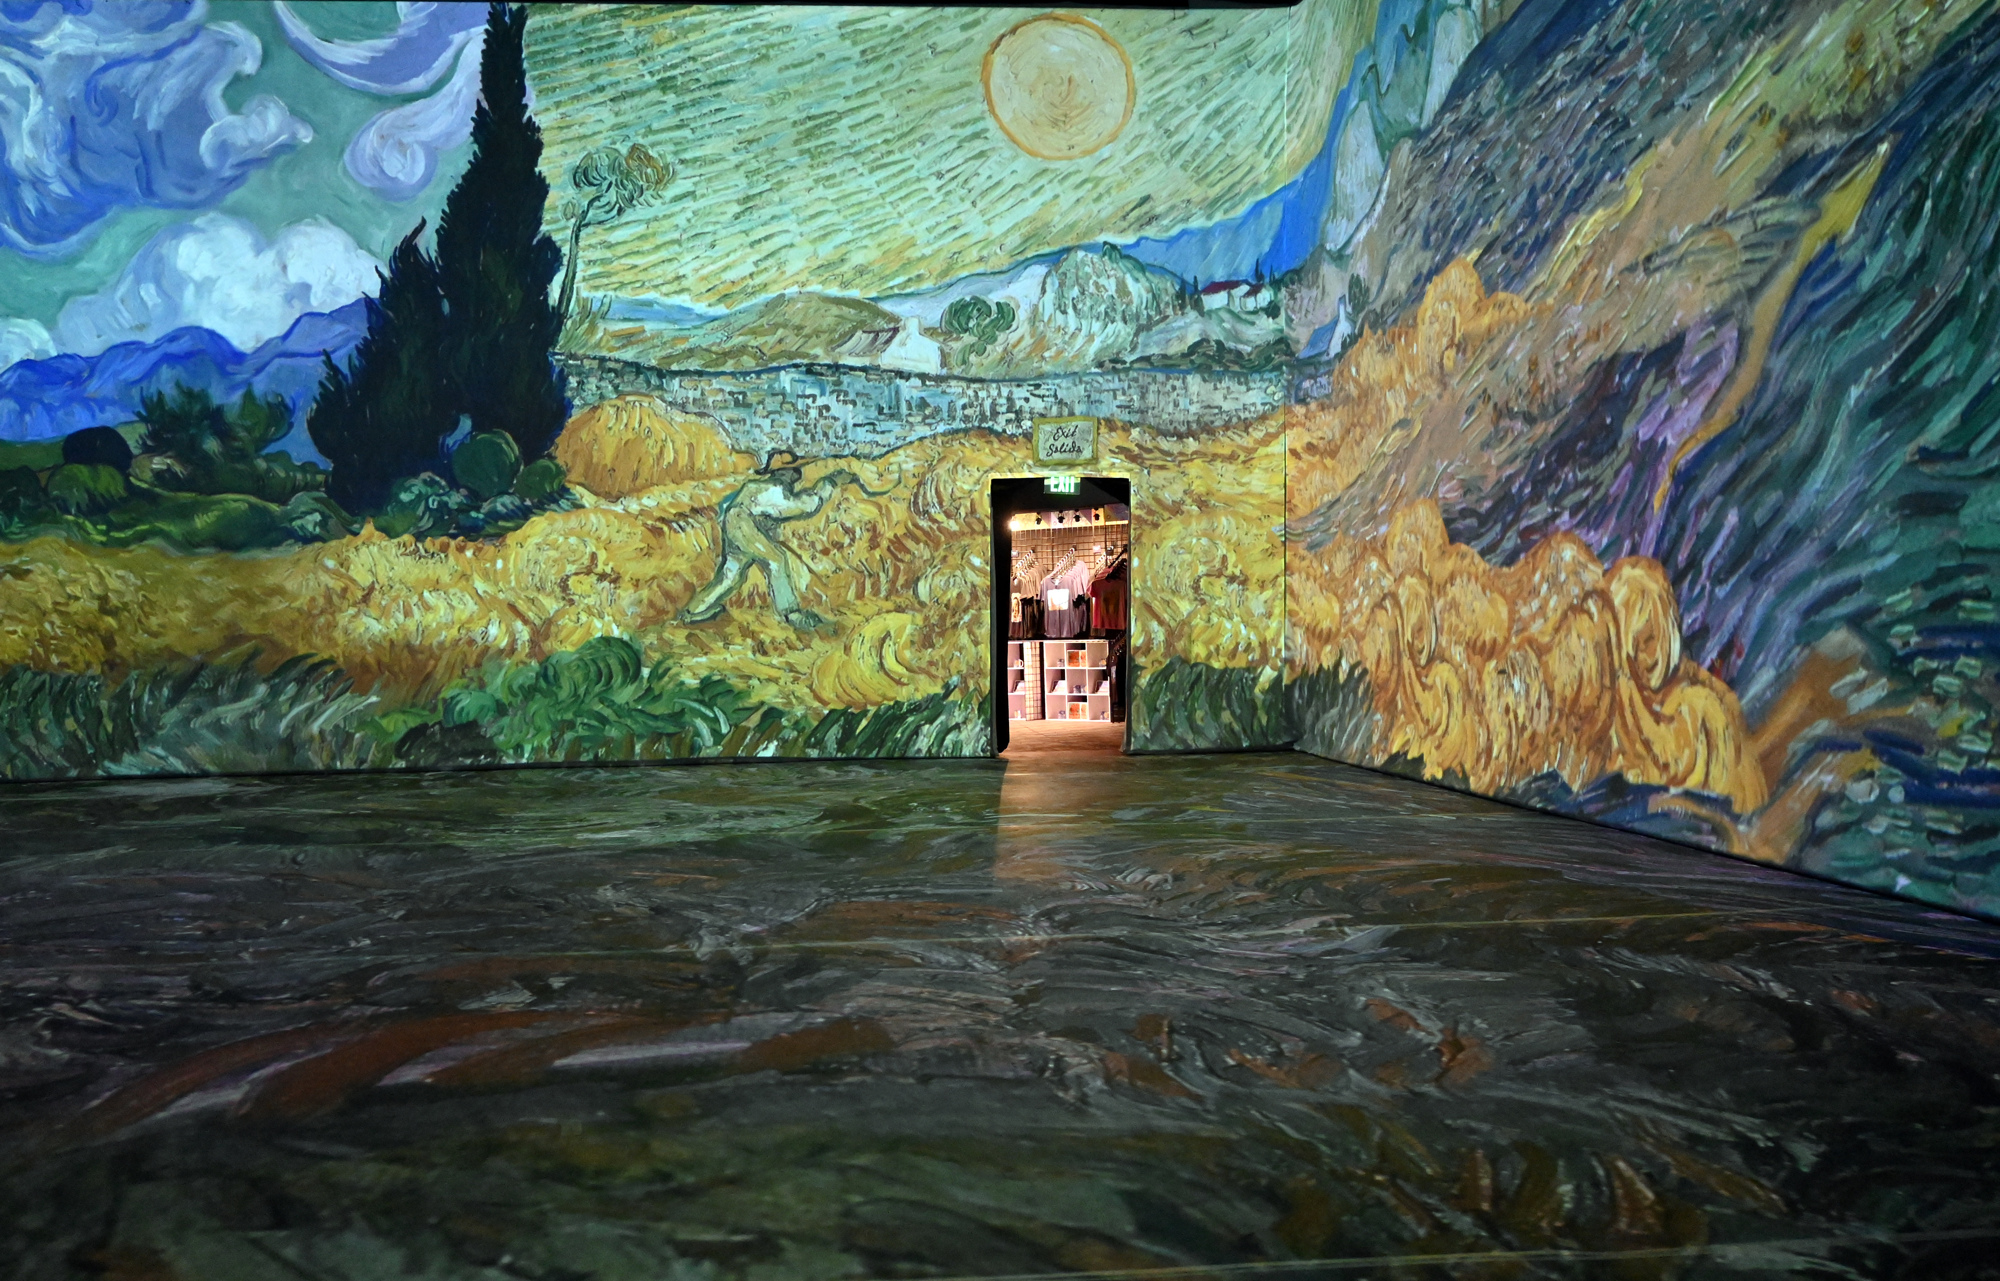 The immersive Van Gogh exhibit has been extended due to popular demand. (Photo: Spencer Fordin)